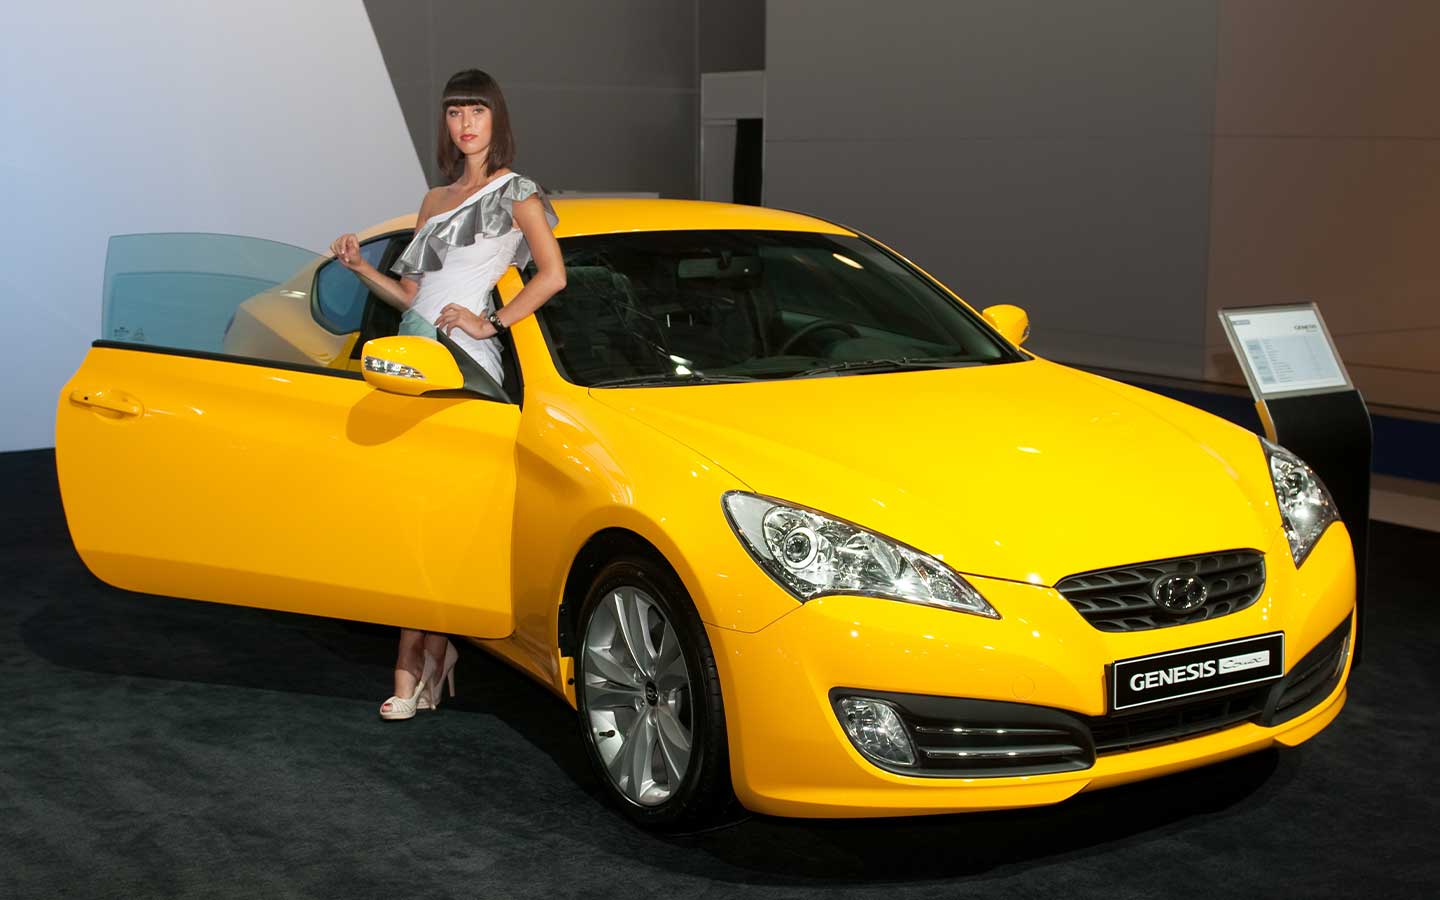 according to the History of Hyundai Genesis Coupe, the model was a two-door sports coupe 